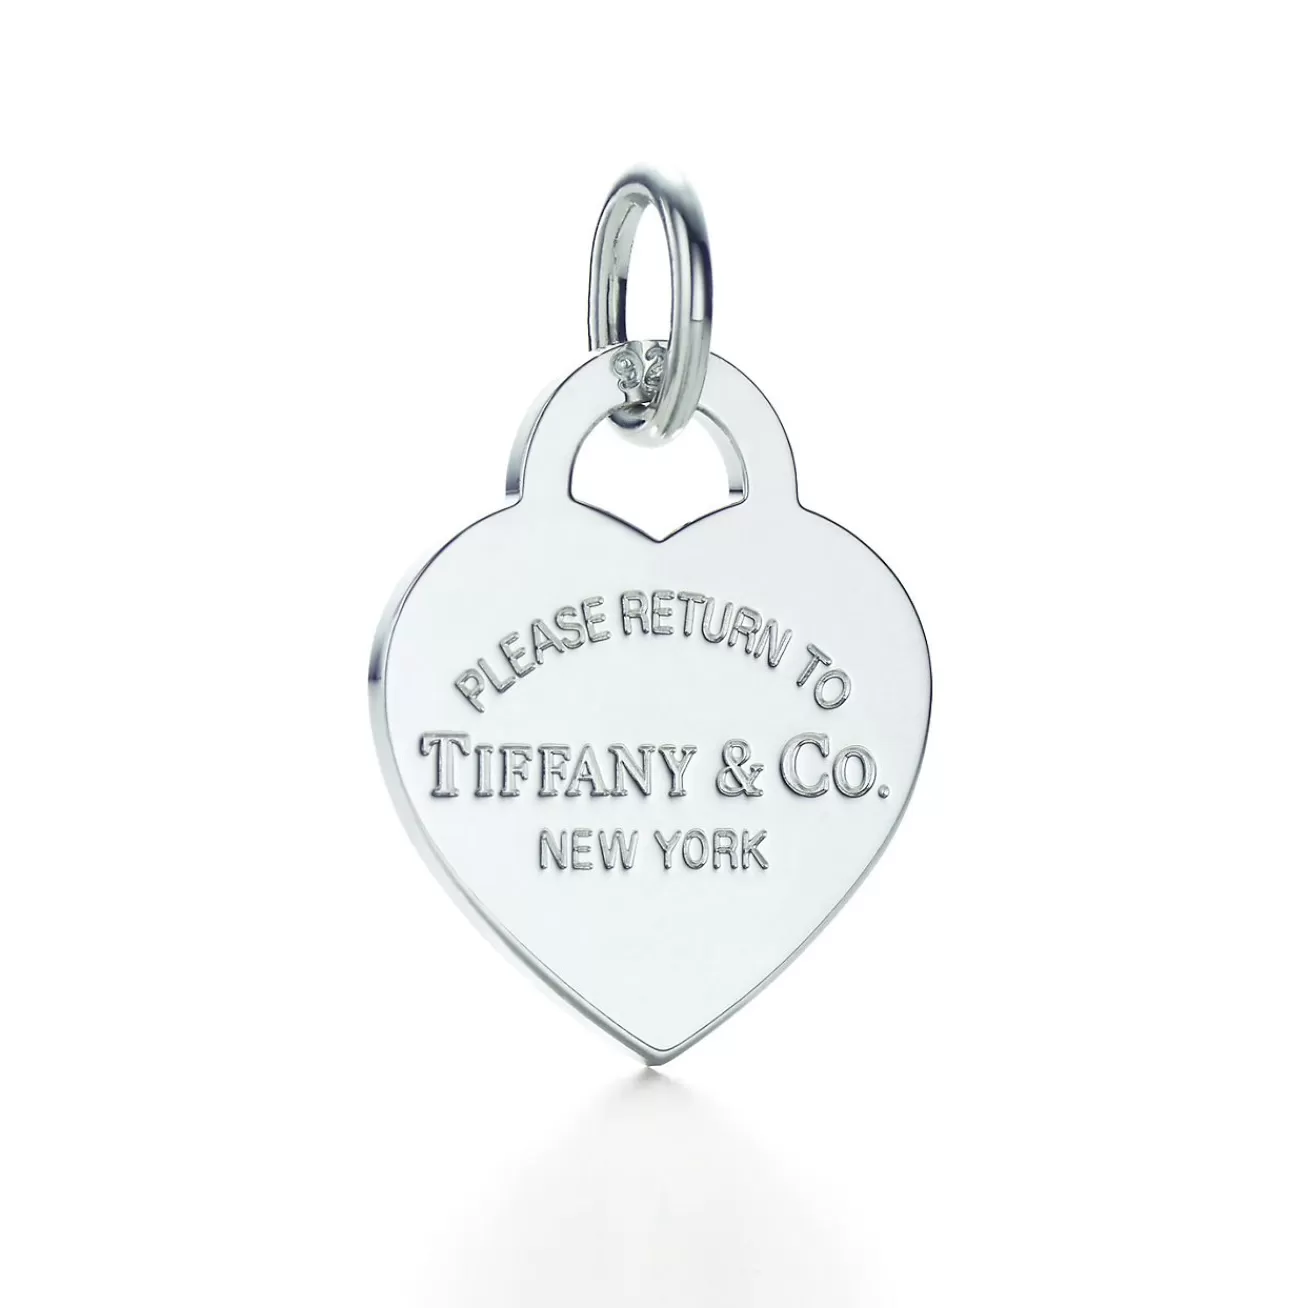 Tiffany & Co. Return to Tiffany® Heart Tag Charm in Silver, Medium | ^ Necklaces & Pendants | Sterling Silver Jewelry